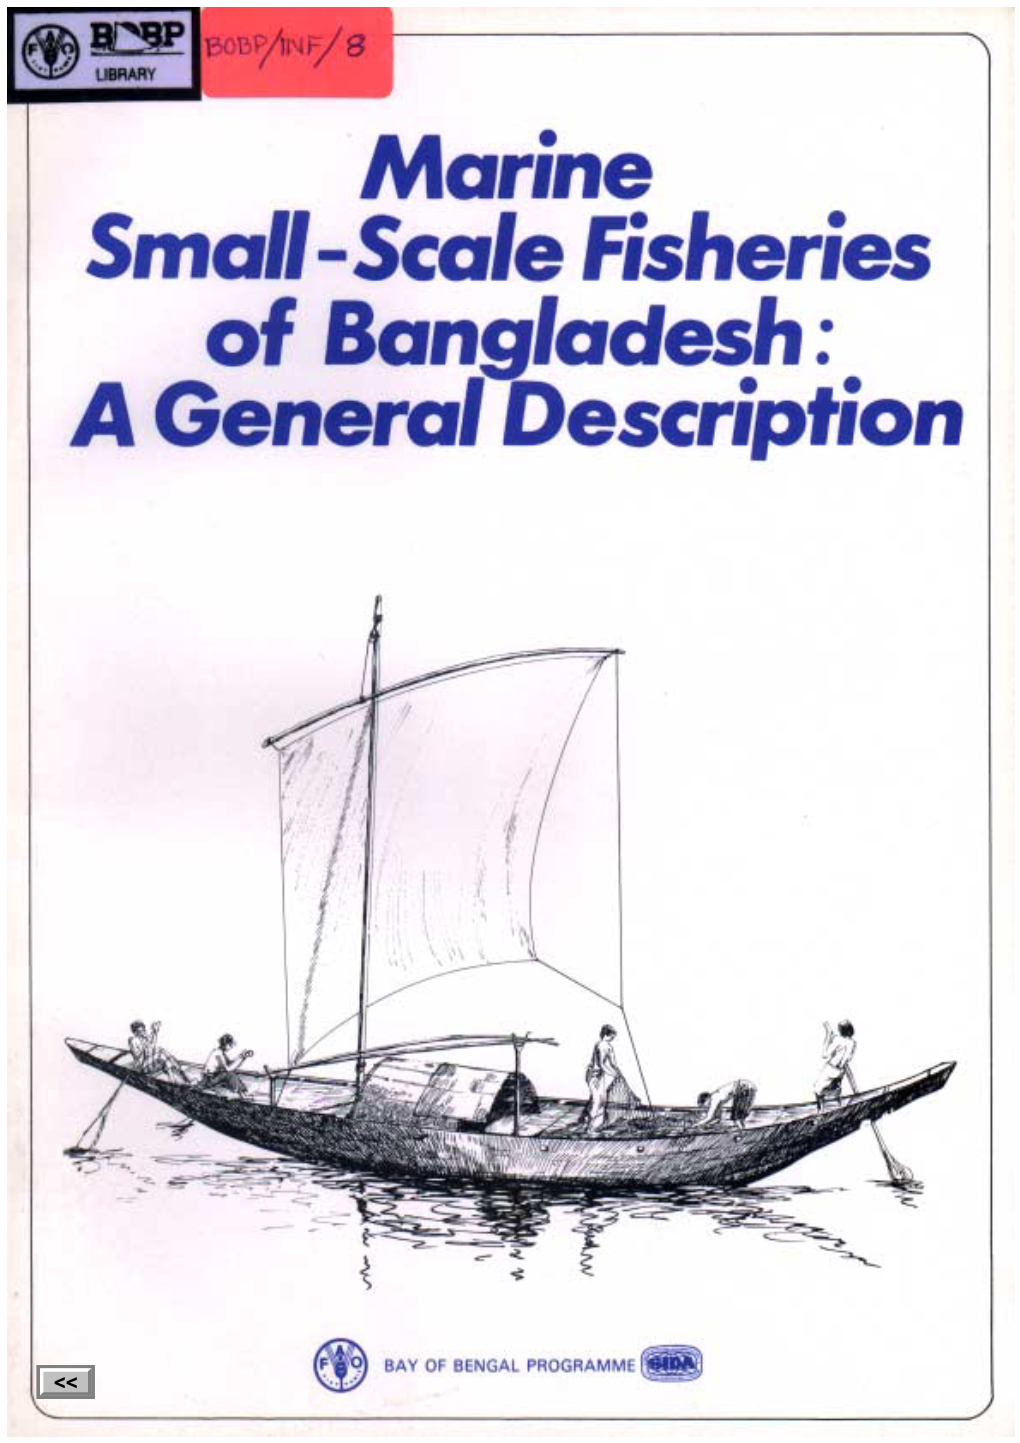 BOBP/INF/8 Development of Small-Scale Fisheries (GCP/RAS/040/SWE)